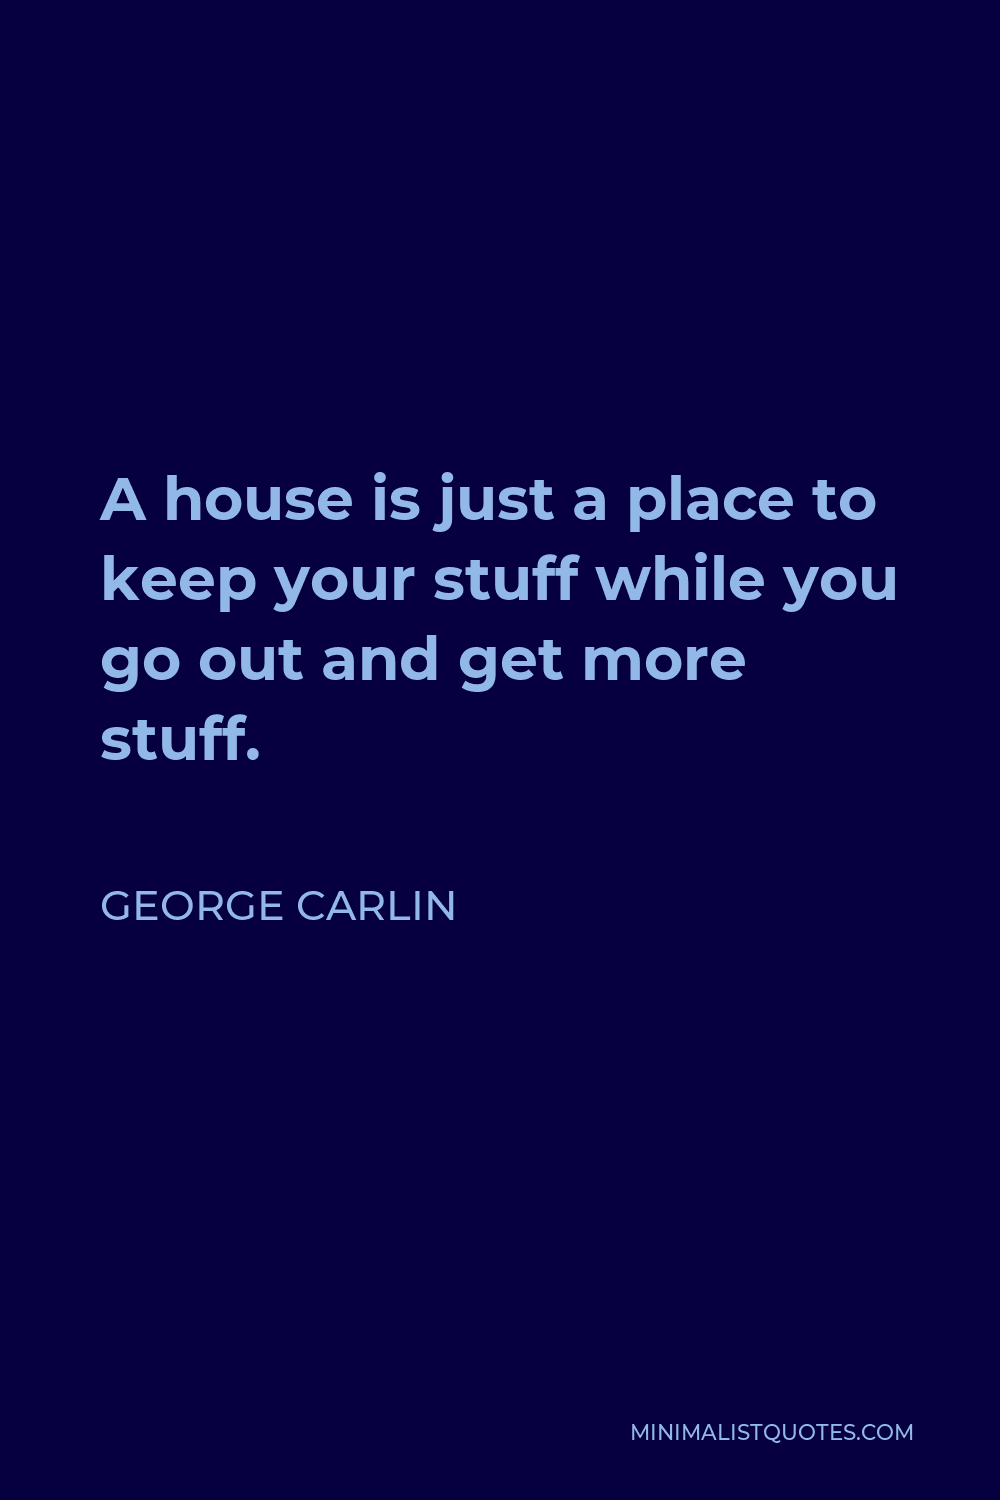 George Carlin Quote - A house is just a place to keep your stuff while you go out and get more stuff.